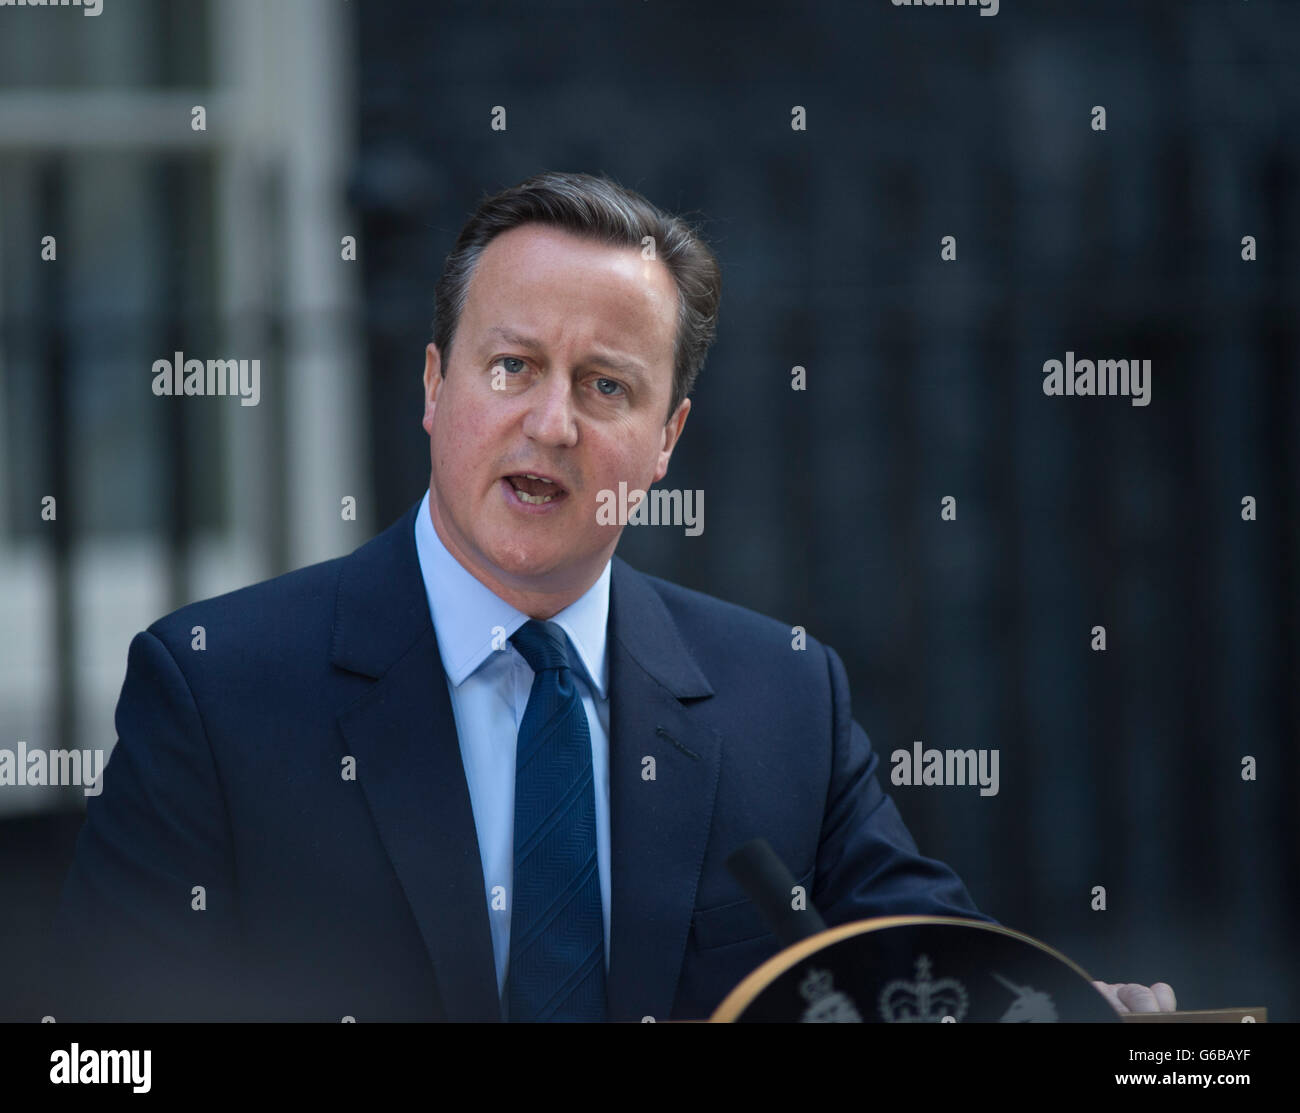 Downing Street, London, UK. 24th June 2016. PM David Cameron announces his decision to step down from leadership before October 2016 in light of EU Referendum outcome. Credit:  Malcolm Park editorial/Alamy Live News. Stock Photo